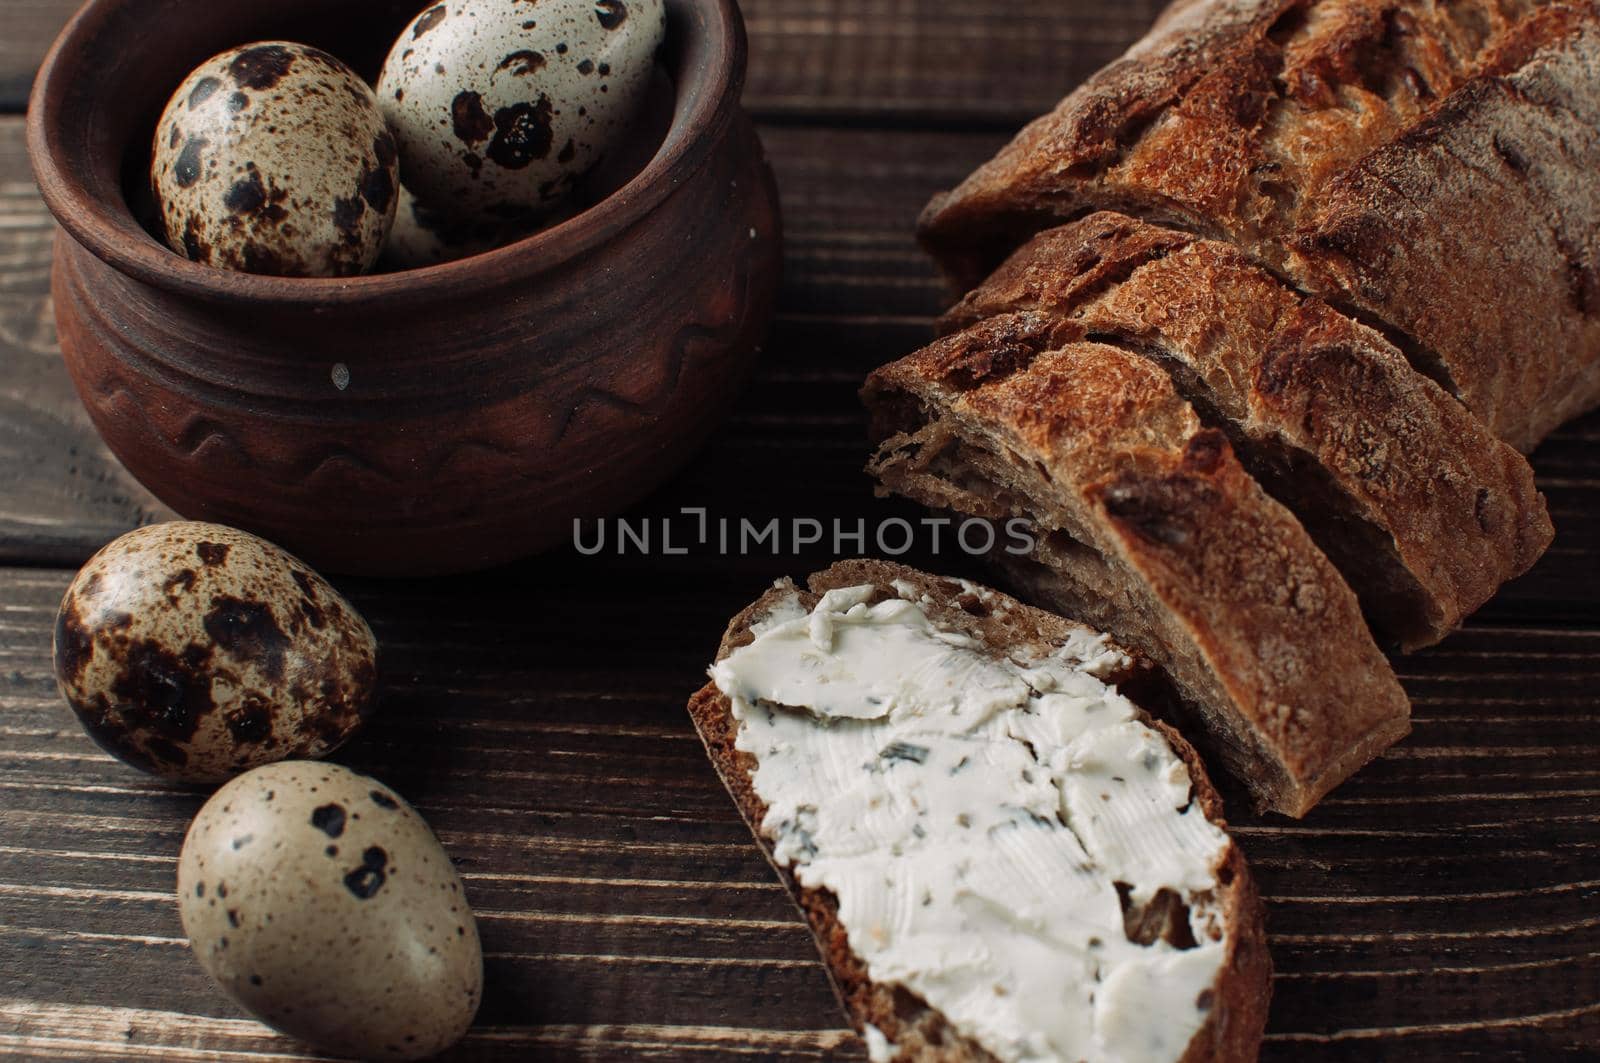 dark buckwheat bread is spread with cottage cheese with herbs in a cut on a wooden table near quail eggs in a clay plate in a rustic style. Snack and breakfast concept.